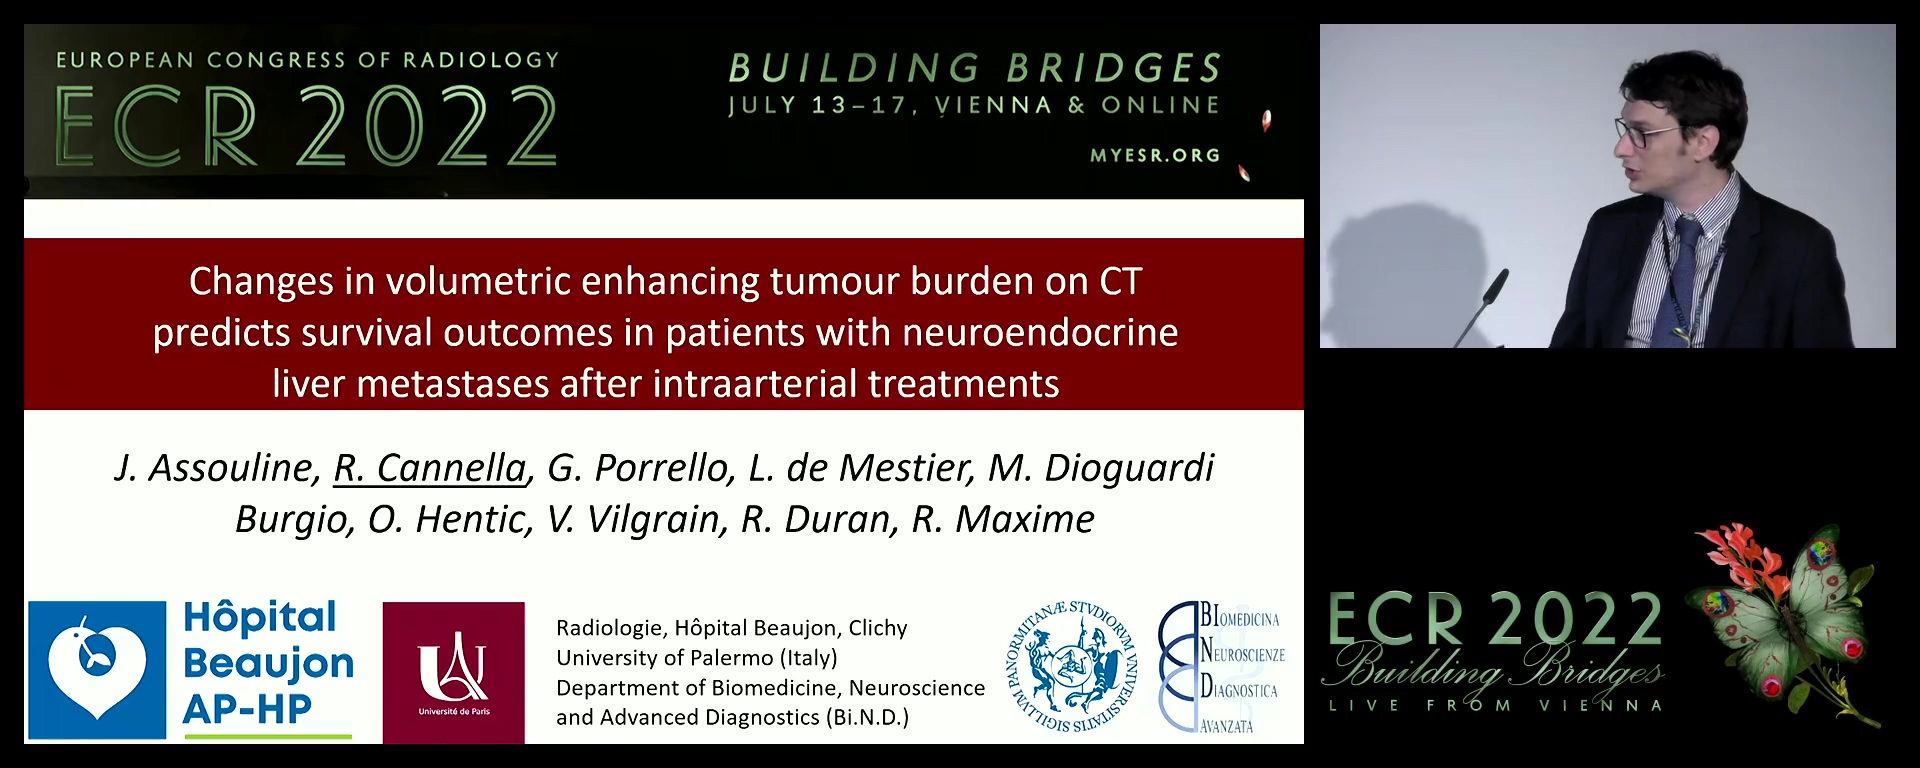 Changes in volumetric enhancing tumour burden on CT predicts survival outcomes in patients with neuroendocrine liver metastases after intraarterial treatments - Roberto Cannella, Palermo / IT